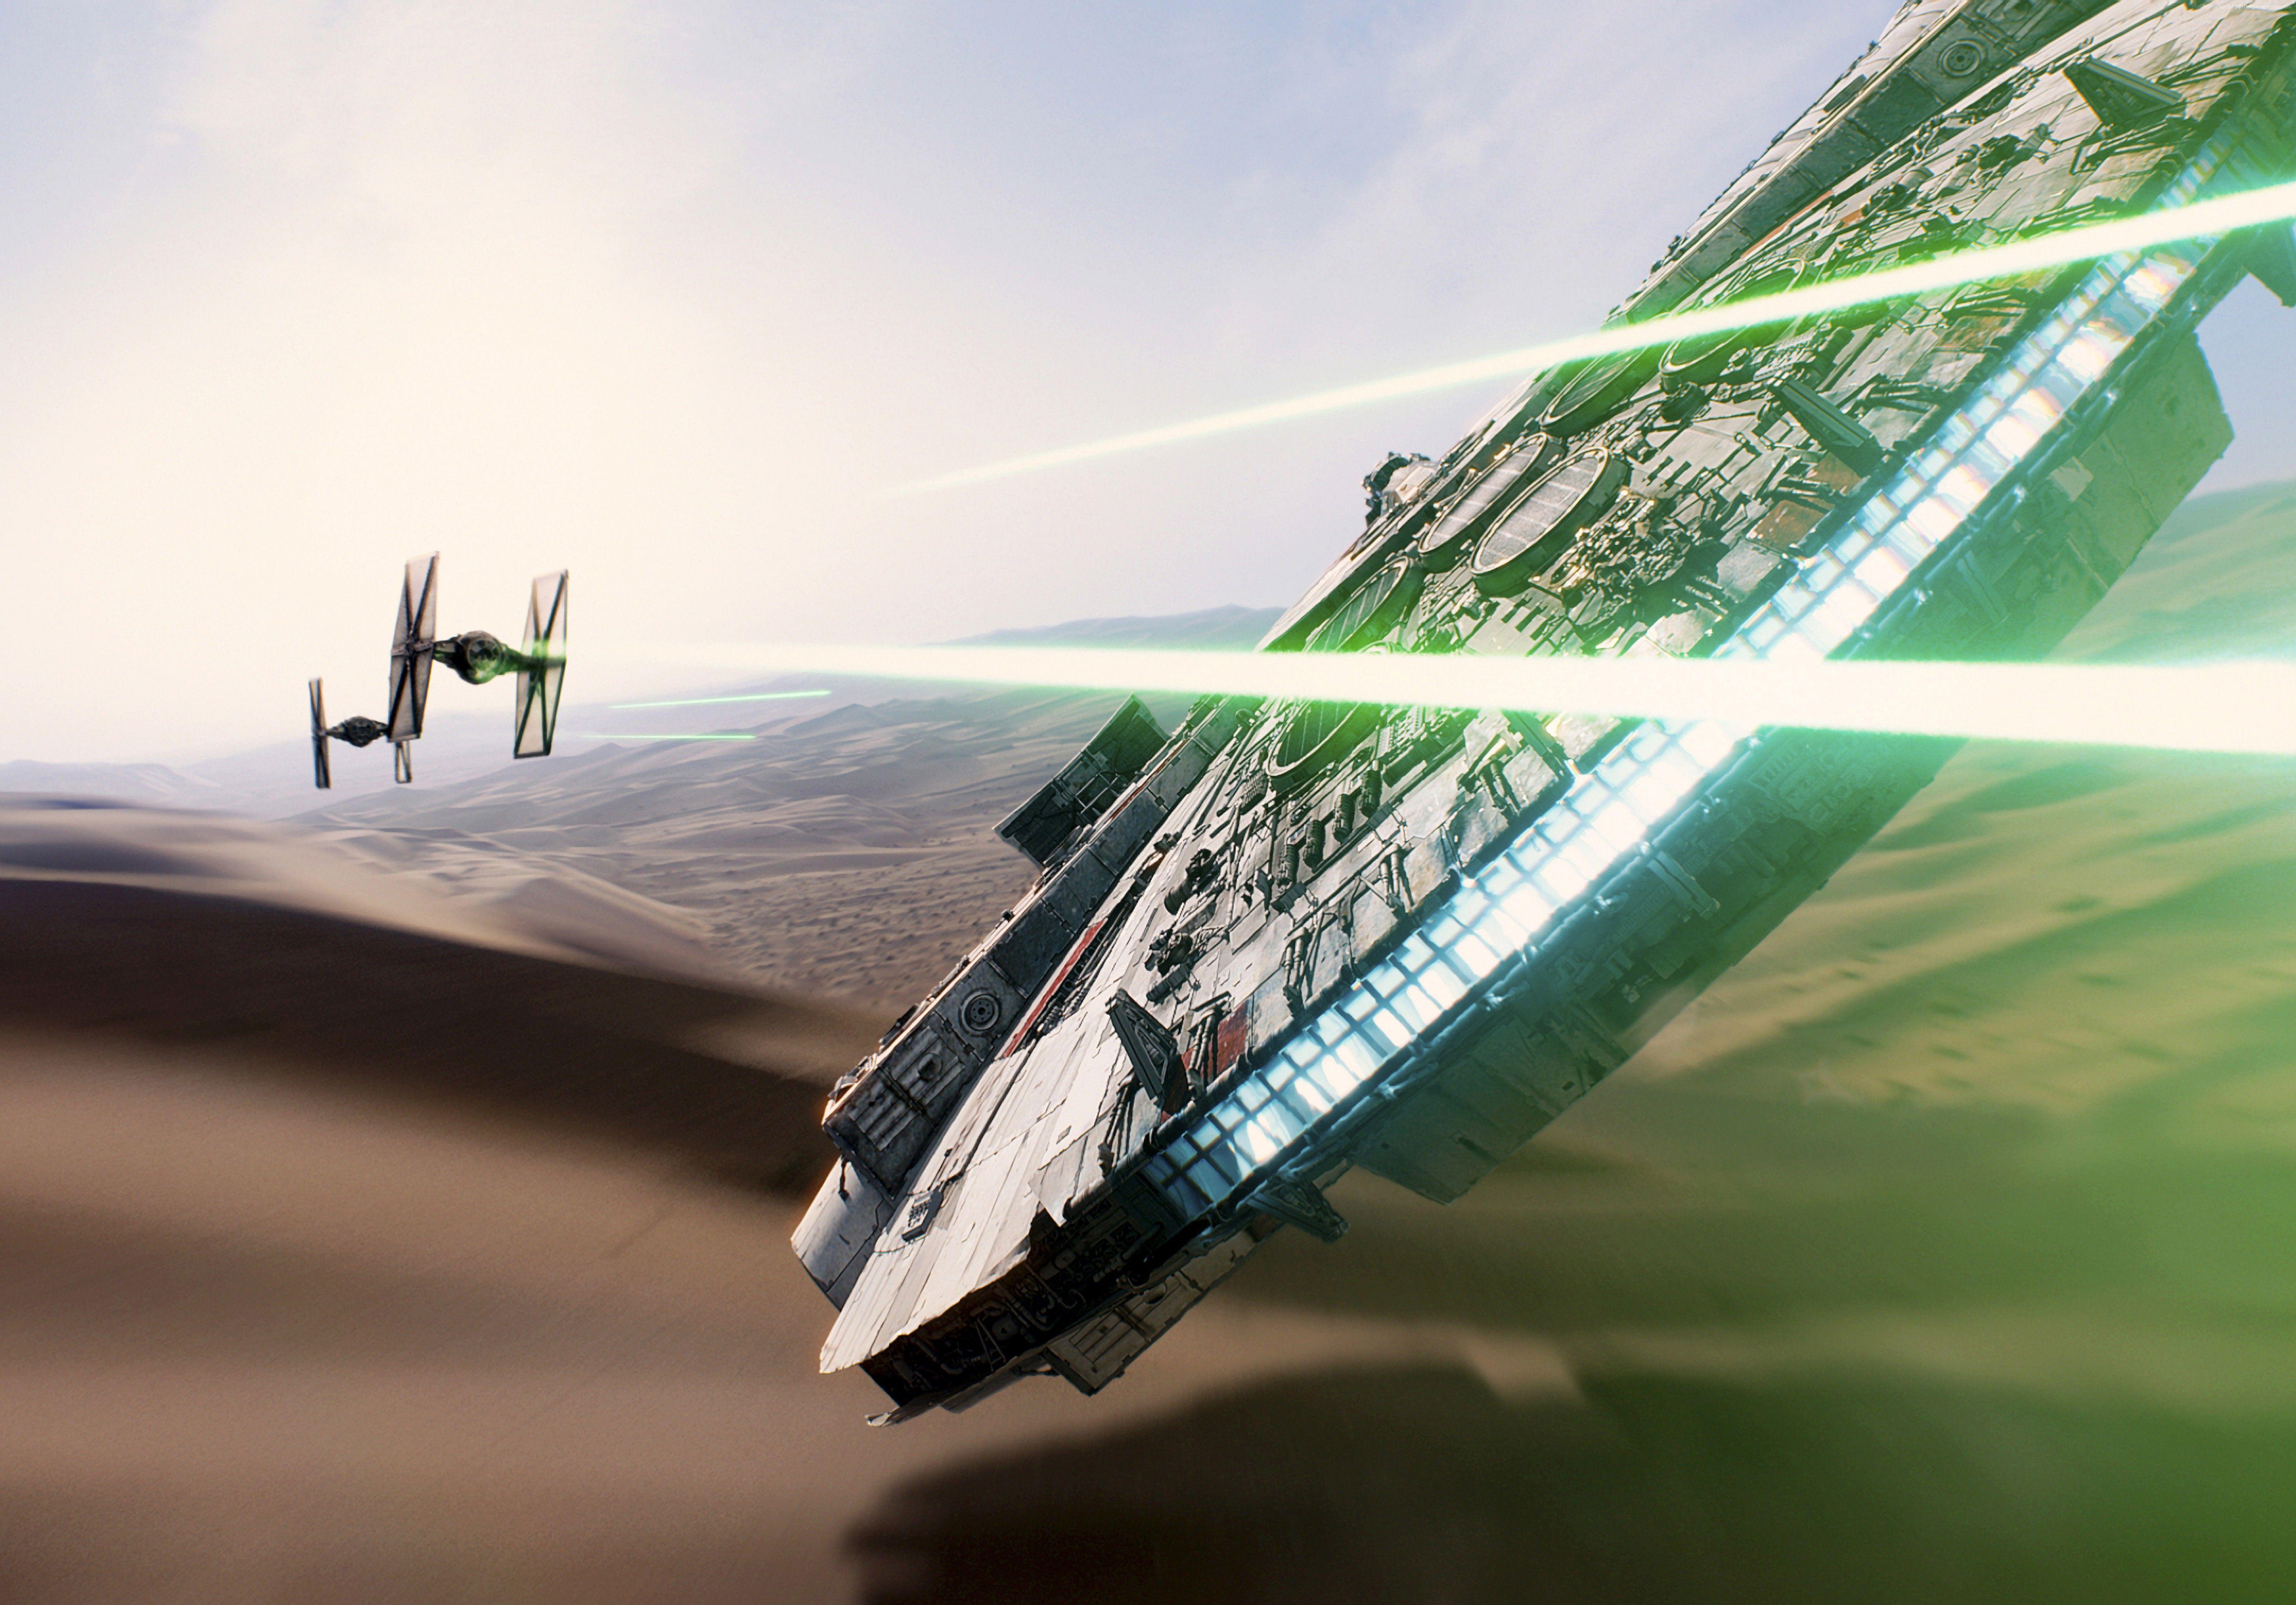 186 Star Wars Episode VII: The Force Awakens HD Wallpapers